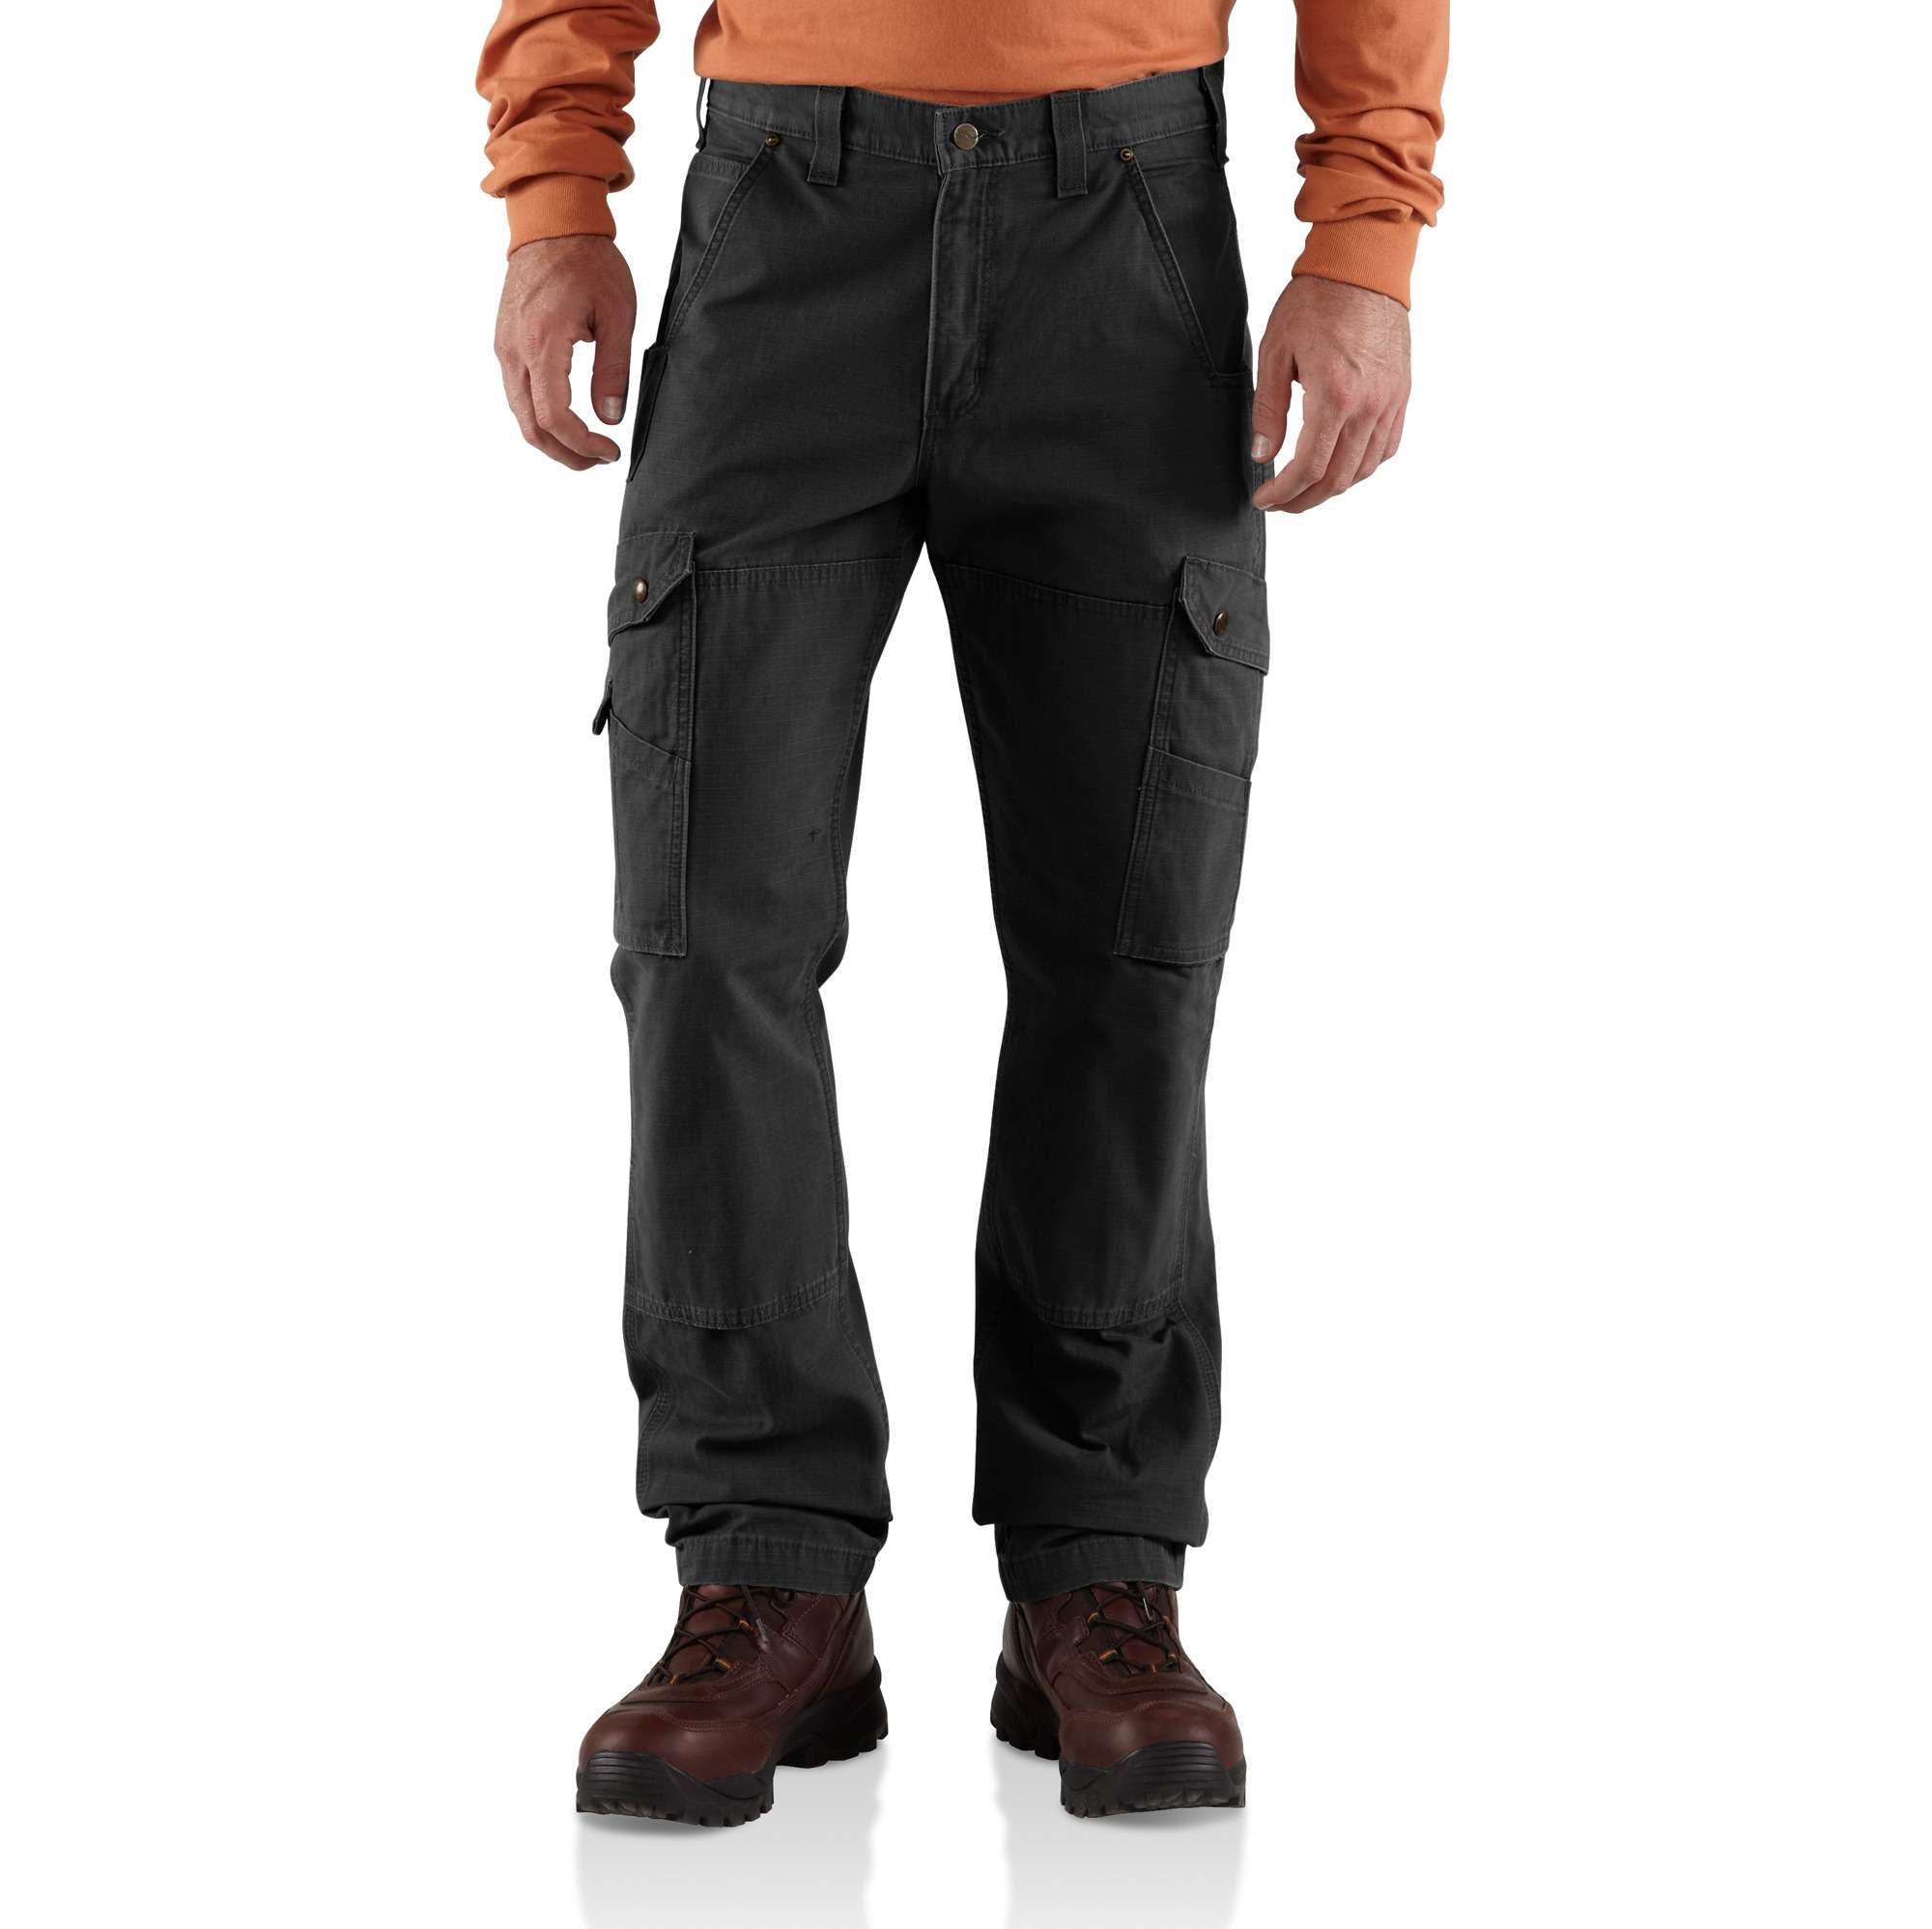 Relaxed Fit Ripstop Cargo Work Pant | Carhartt Reworked